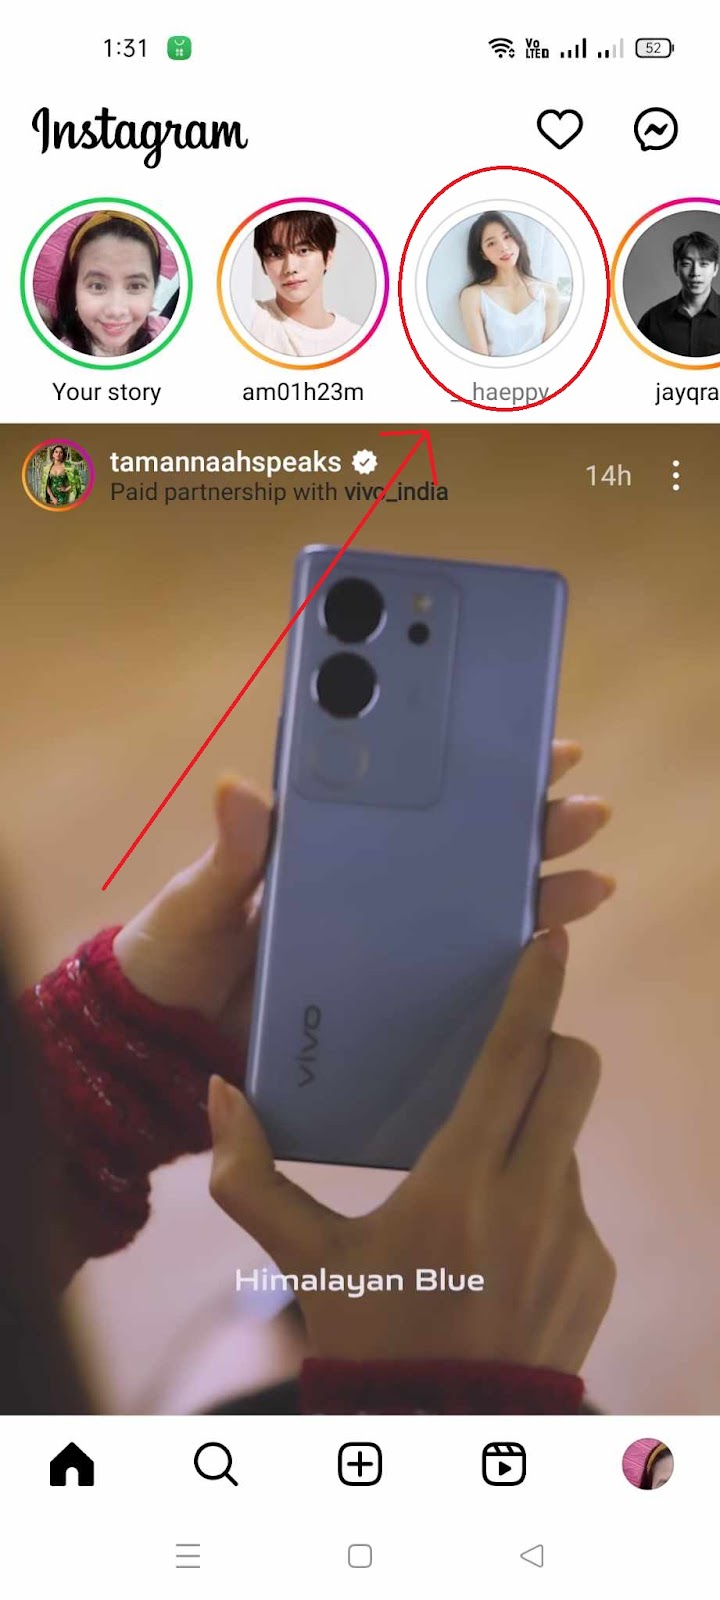 What does Green Circle in Instagram Story Mean - White Circle